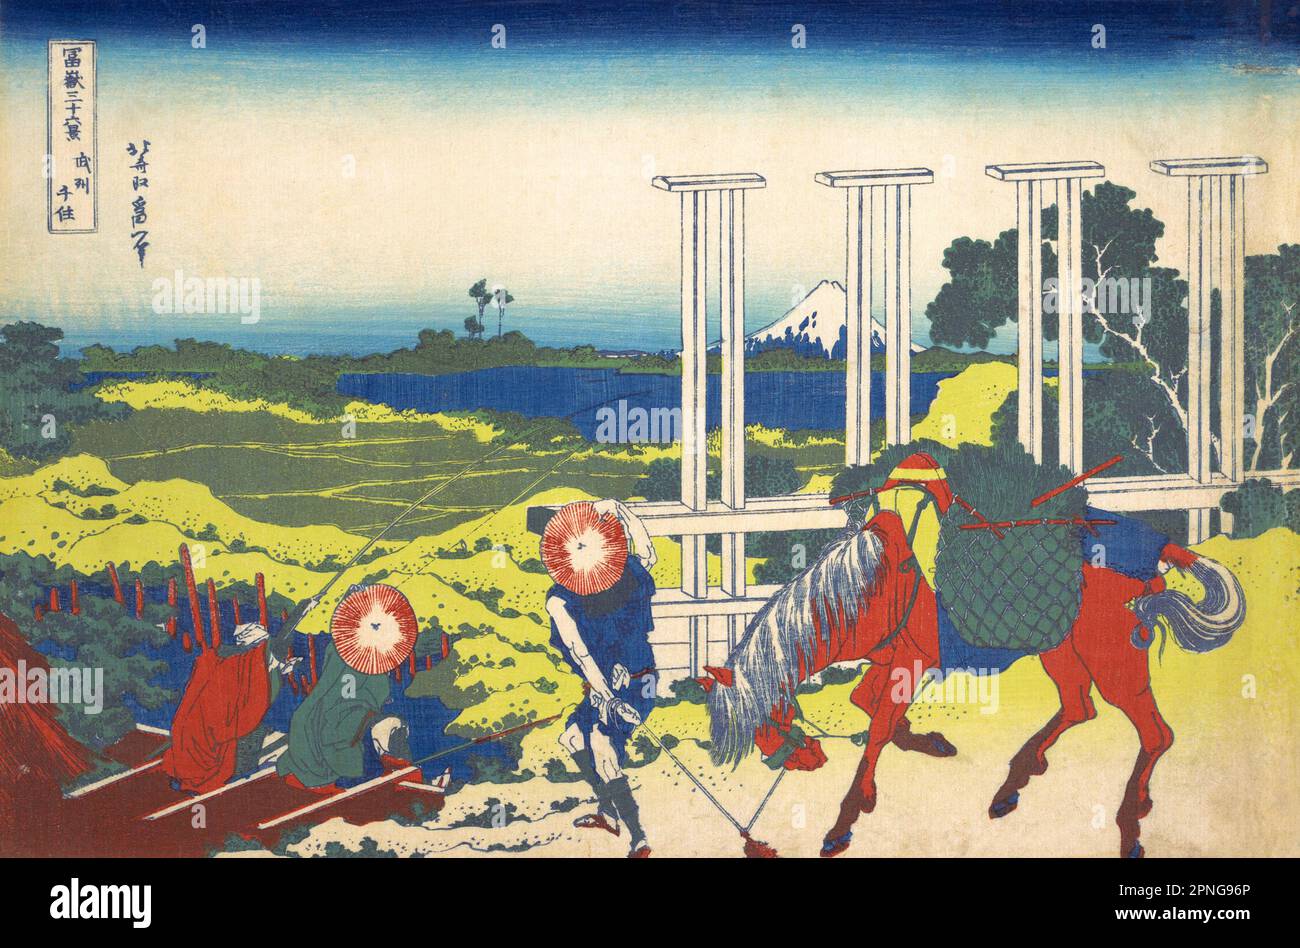 Japan: ‘Senju in Musashi Province’. Ukiyo-e woodblock print from the series ‘Thirty-Six Views of Mount Fuji’ by Katsushika Hokusai (31 October 1760 - 10 May 1849), 1830.  ‘Thirty-six Views of Mount Fuji’ is an ‘ukiyo-e’ series of woodcut prints by Japanese artist Katsushika Hokusai. The series depicts Mount Fuji in differing seasons and weather conditions from a variety of places and distances. It actually consists of 46 prints created between 1826 and 1833. The first 36 were included in the original publication and, due to their popularity, 10 more were added after the original publication. Stock Photo